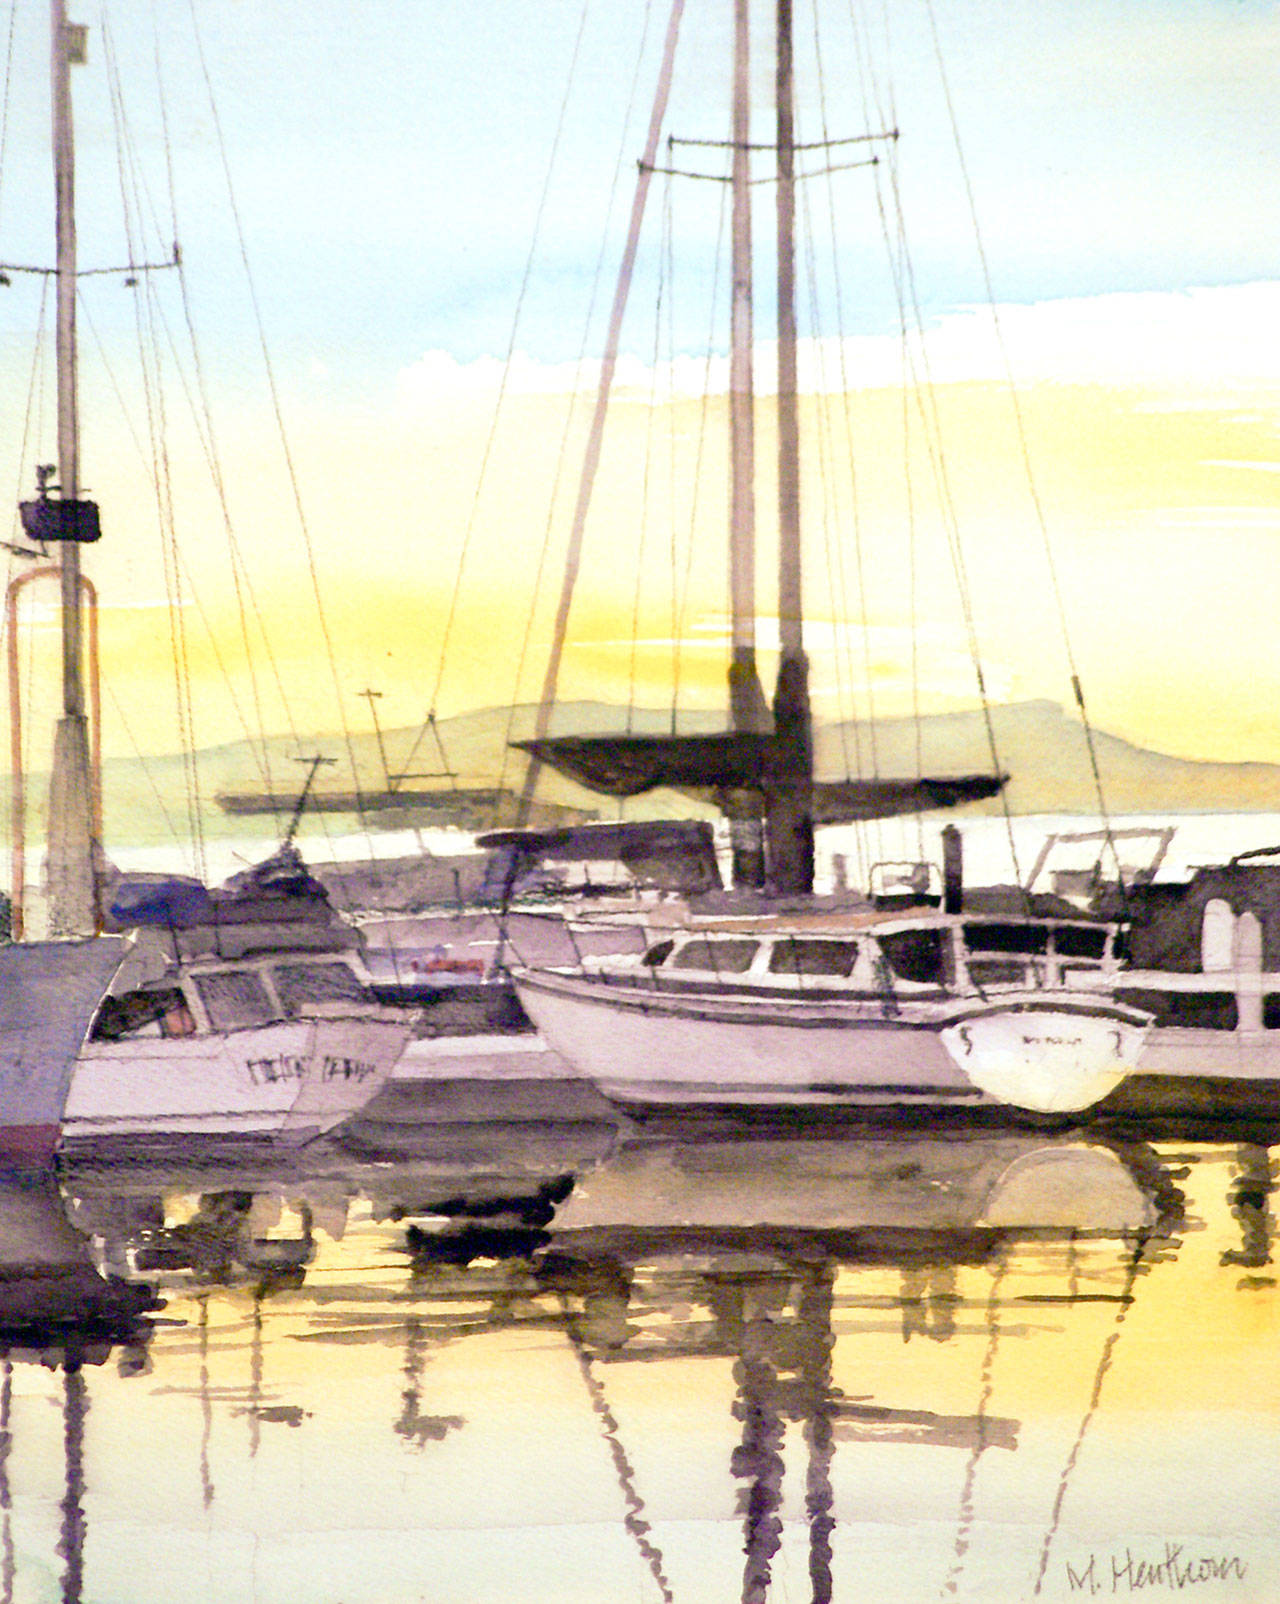 Port Townsend painter Mark Henthorn will showcase his favorite subjects: Coastlines, the quieter and softer outdoor moments, and sea and townscapes at the Port Townsend Gallery, 715 Water St., for Port Townsend’s Art Walk Saturday from 5:30 p.m. to 8 p.m. (Mark Henthorn)